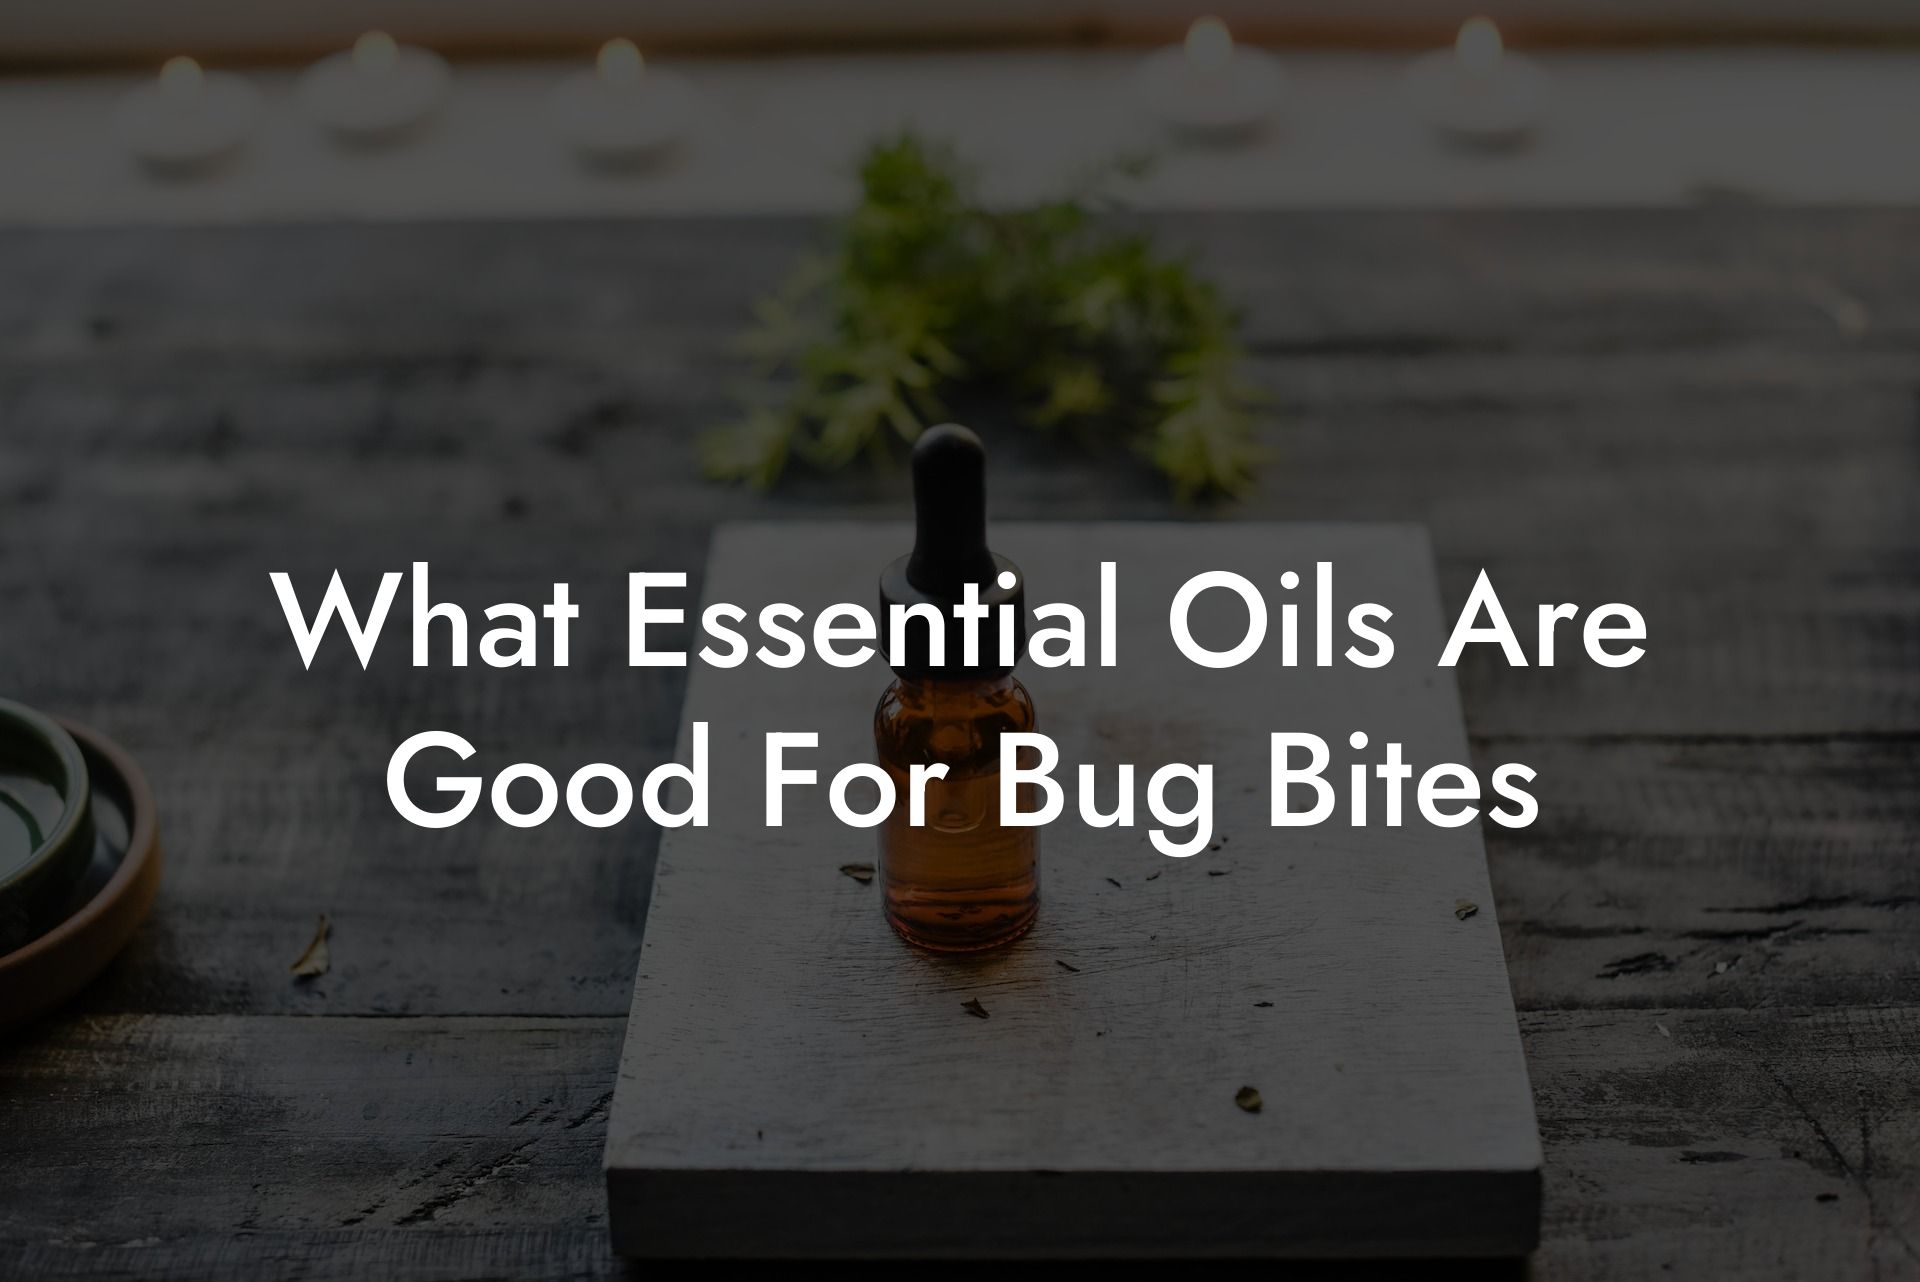 What Essential Oils Are Good For Bug Bites